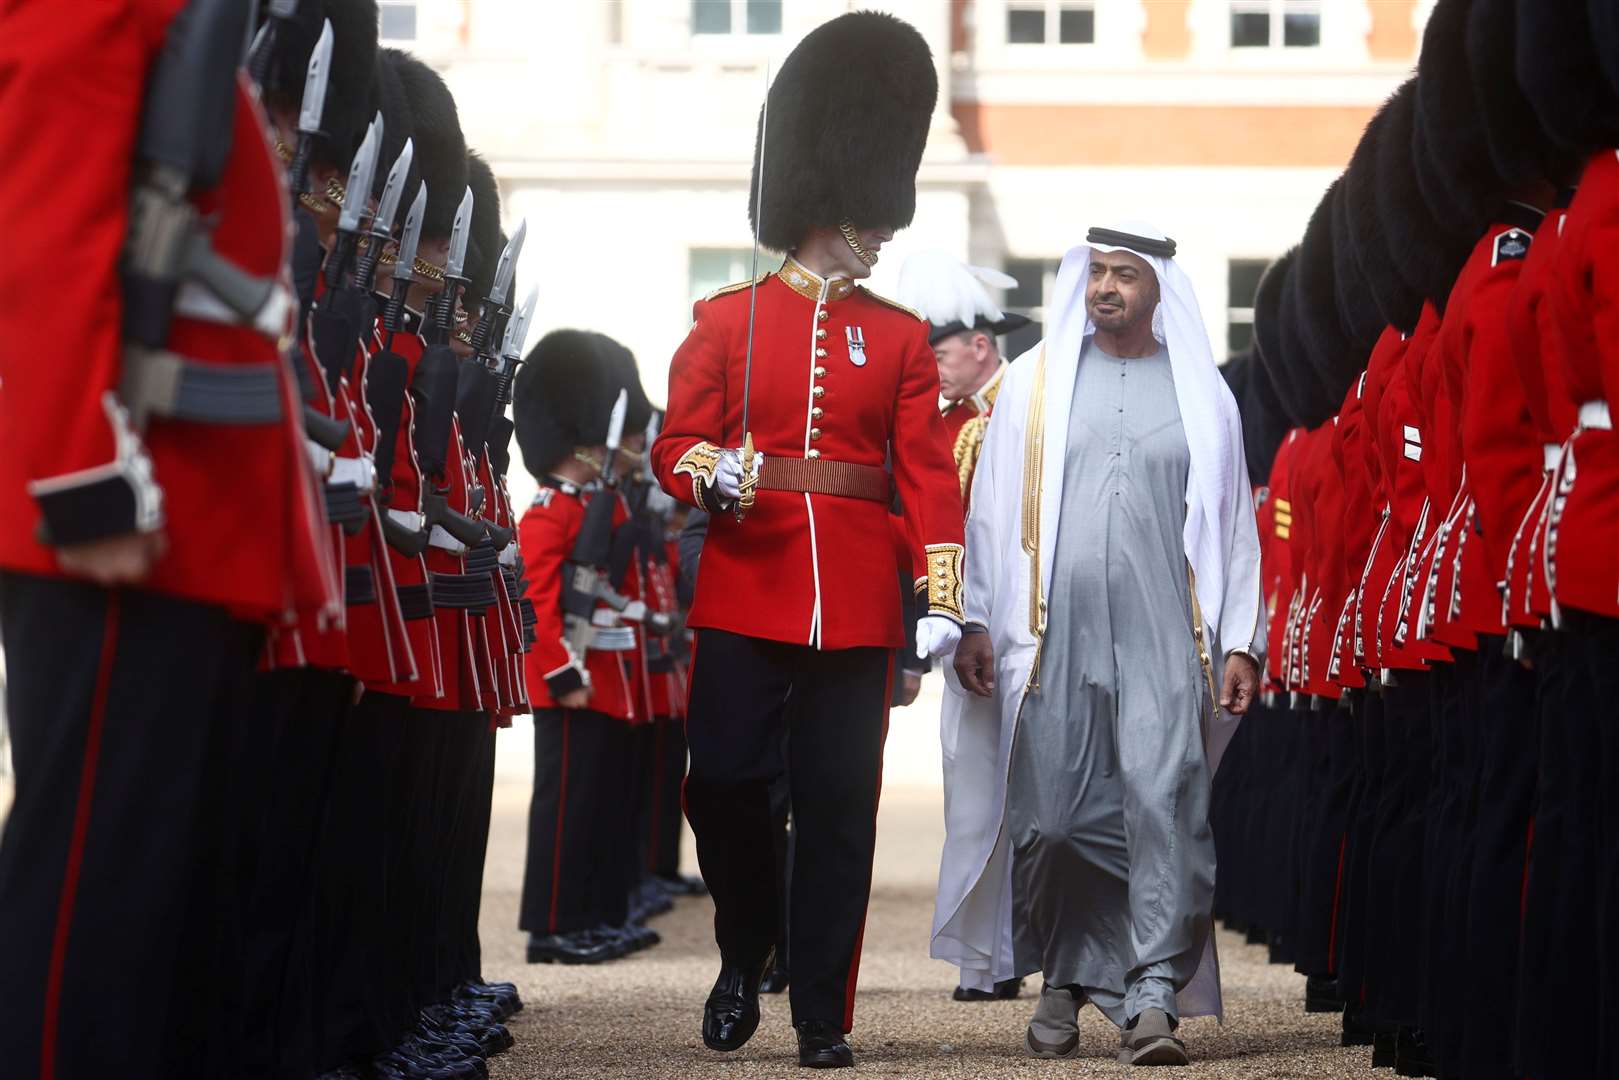 Sheikh Mohammed bin Zayed Al Nahyan, Crown Prince of the Emirate of Abu Dhabi, inspects a Guard of Honour in central London (Hannah McKay/PA)